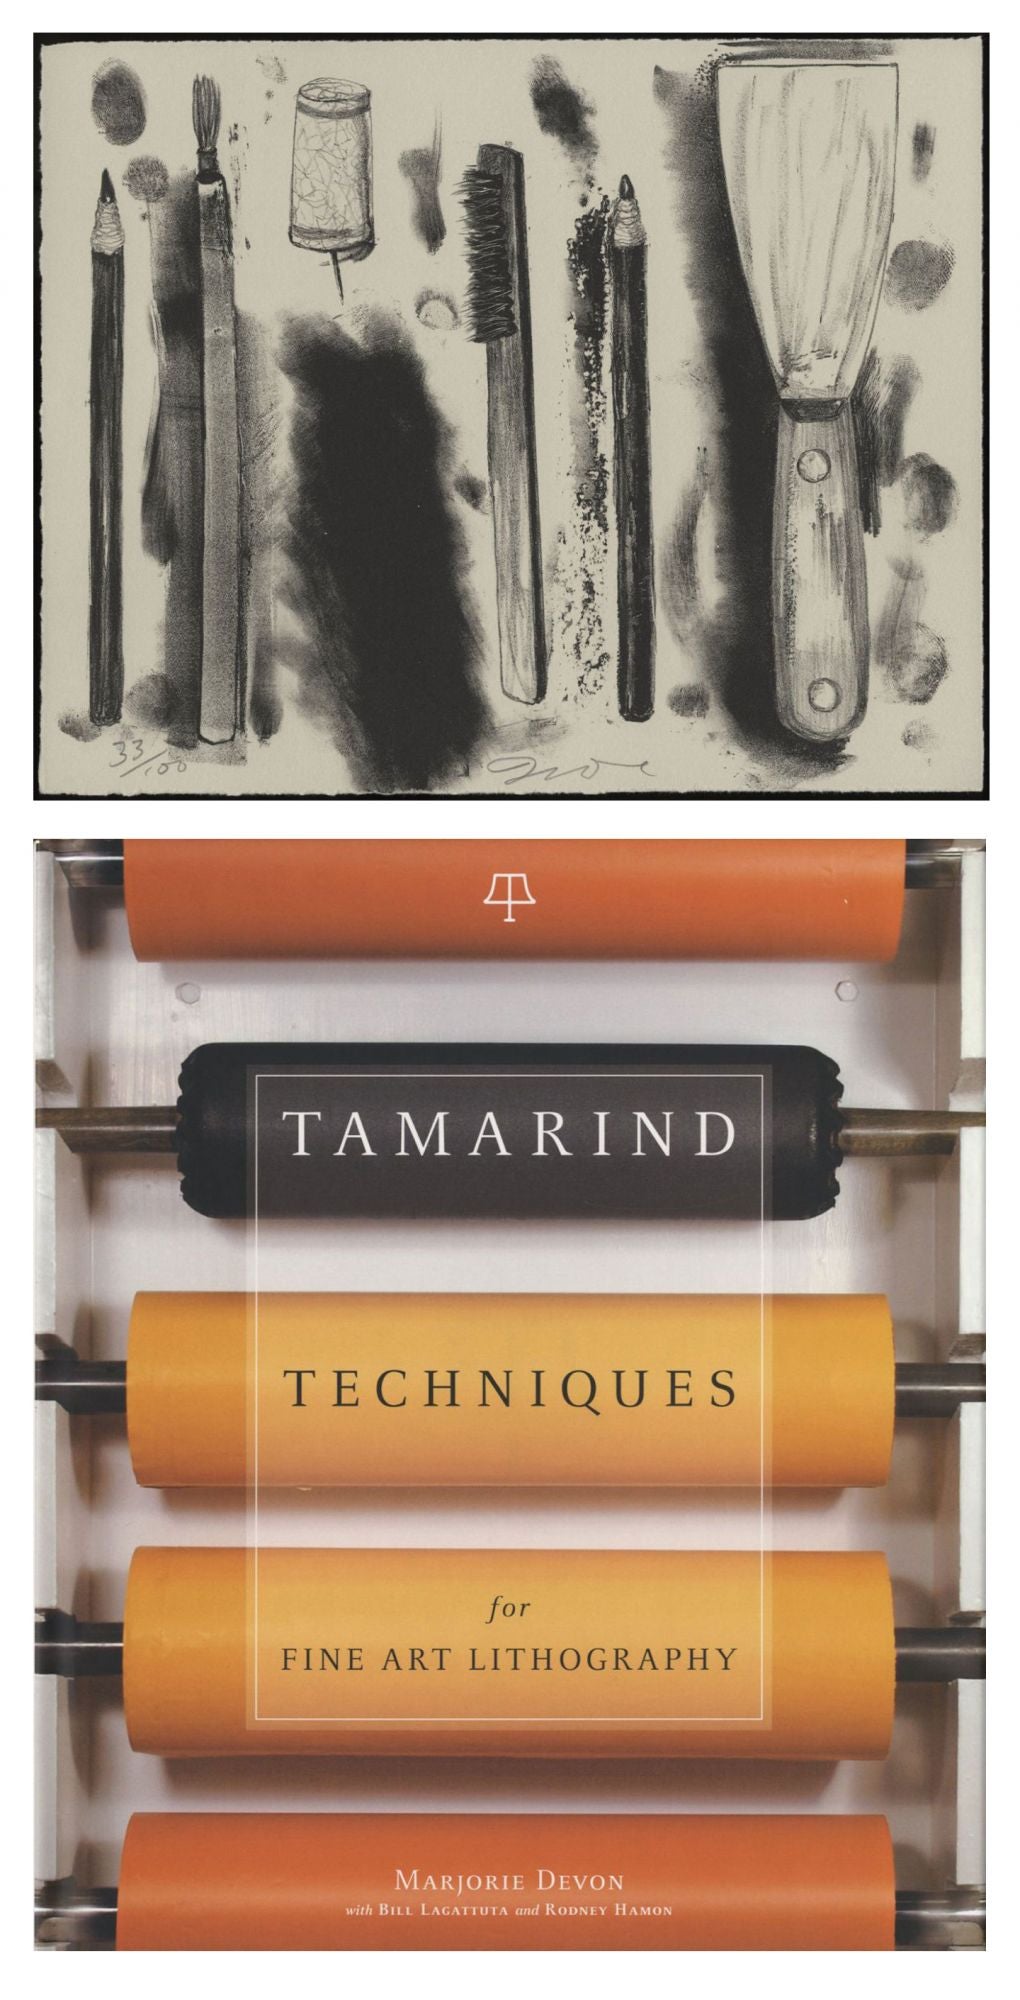 Tamarind Techniques for Fine Art Lithography, Limited Edition (with Lithograph by Jim Dine)